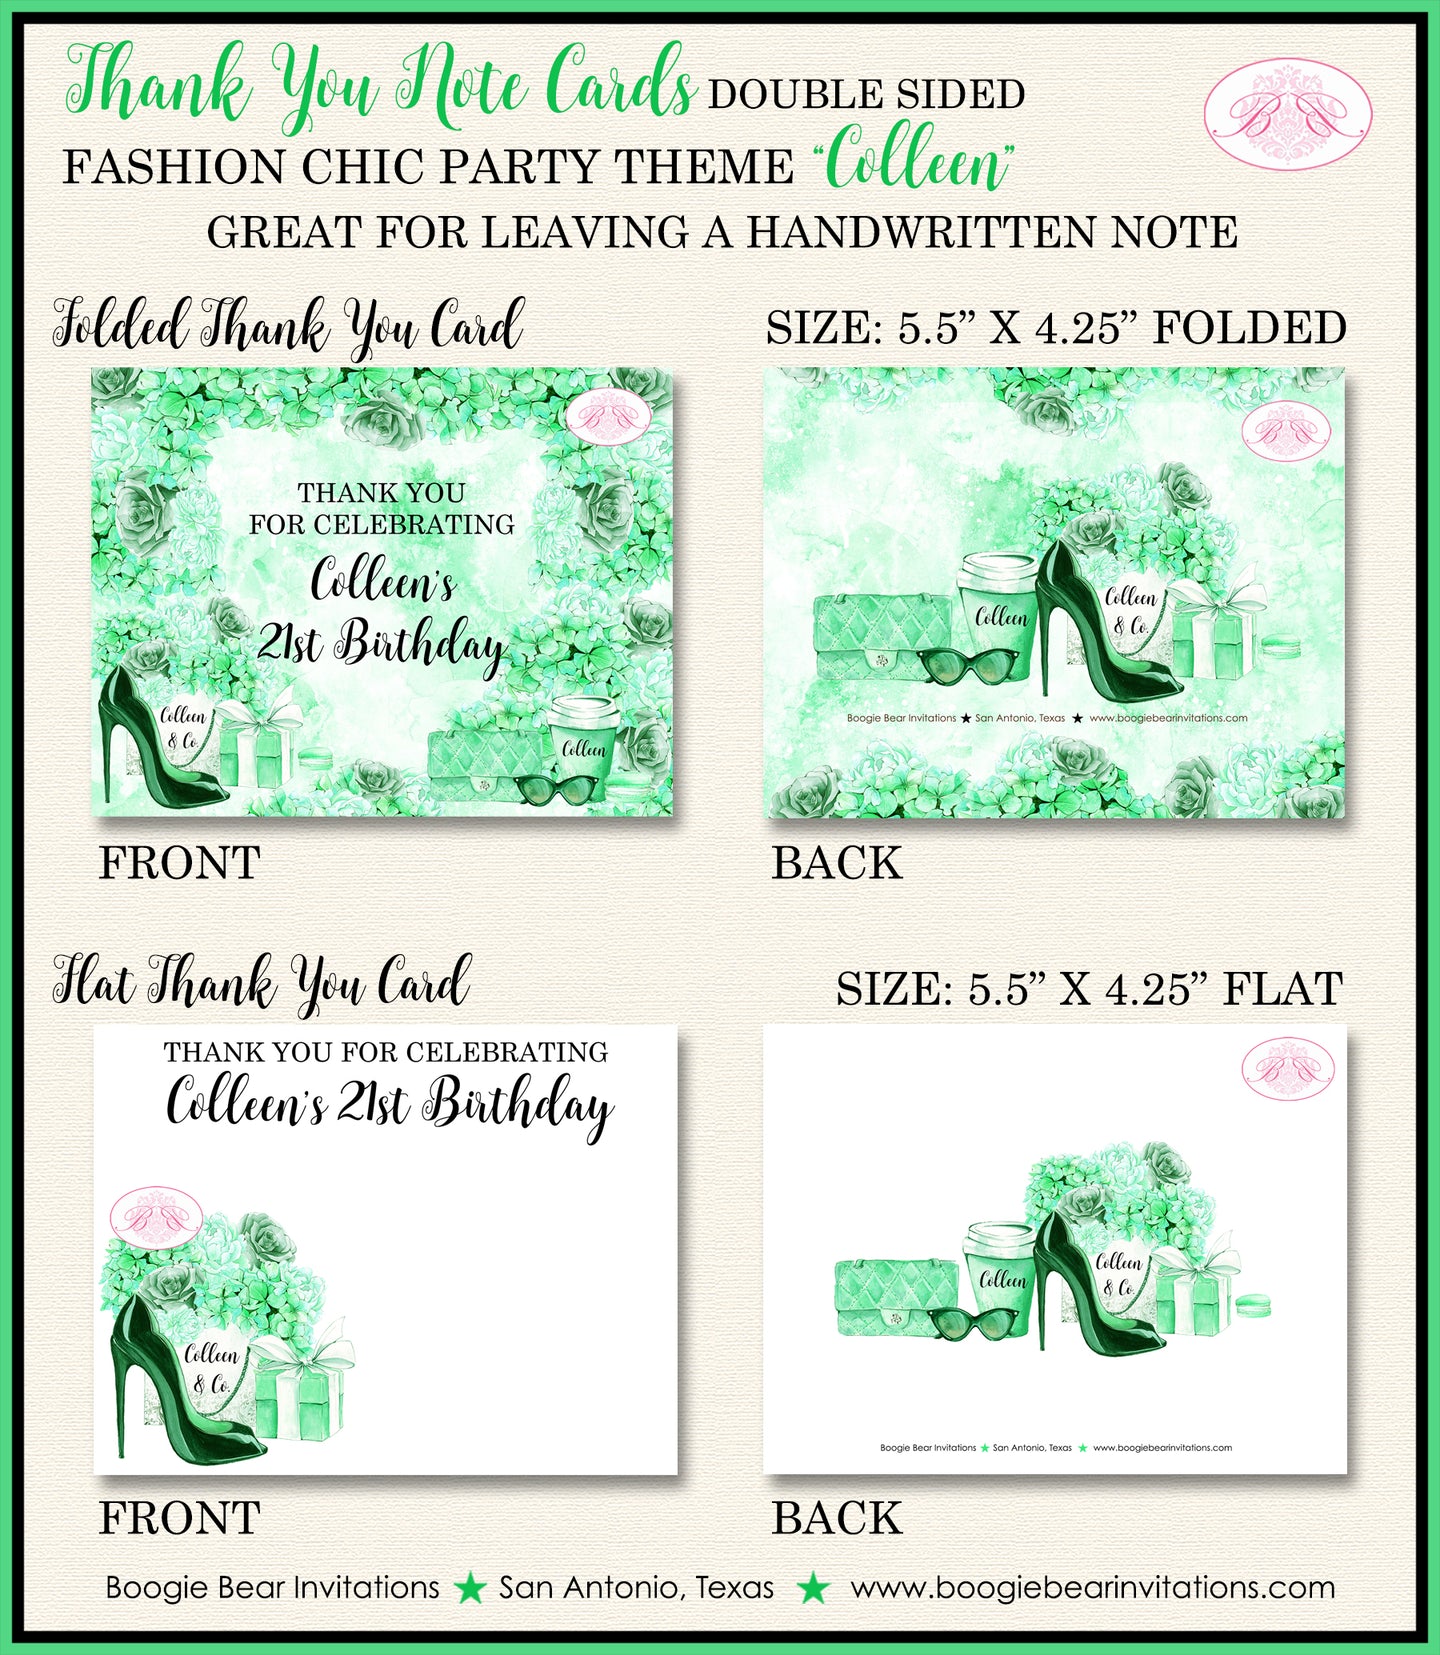 Fashion Chic Party Thank You Cards Birthday Green Black Heels Shoes Boogie Bear Invitations Colleen Theme Printed